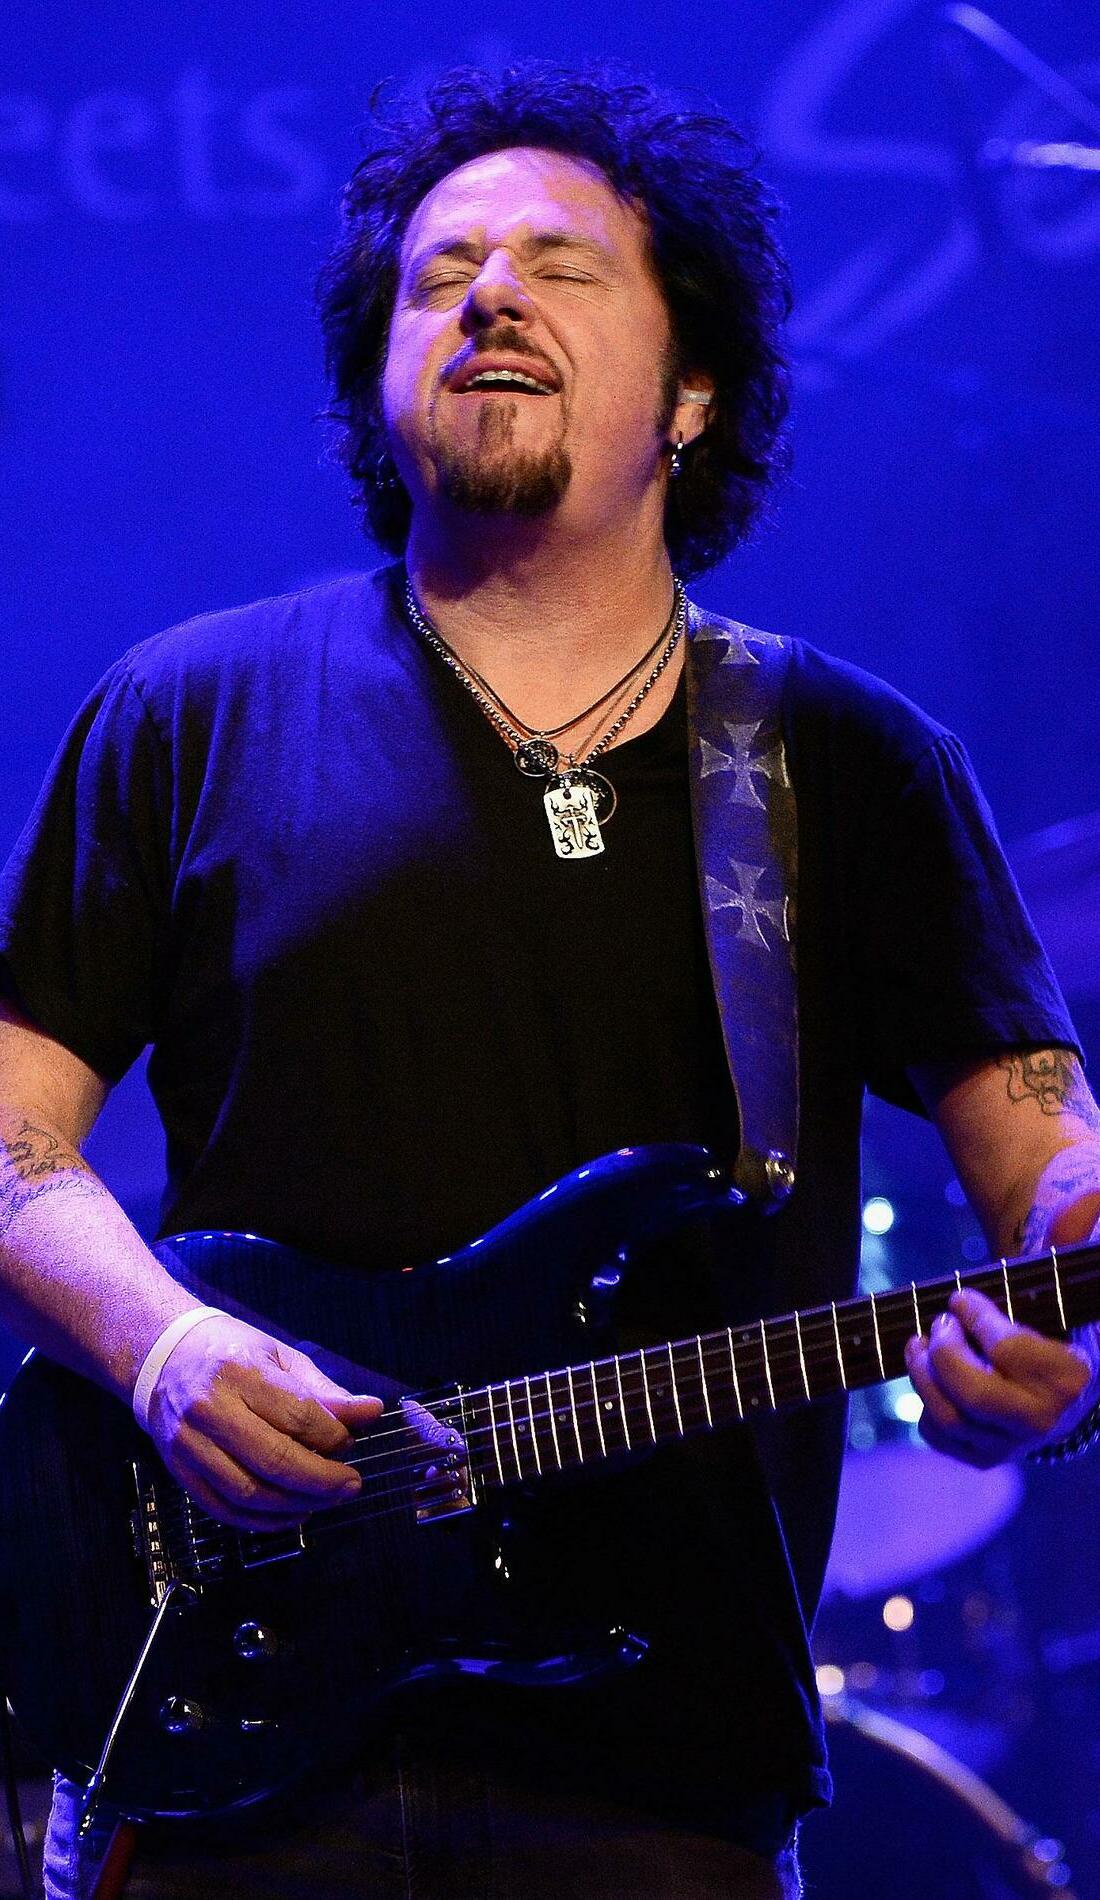 A Steve Lukather live event